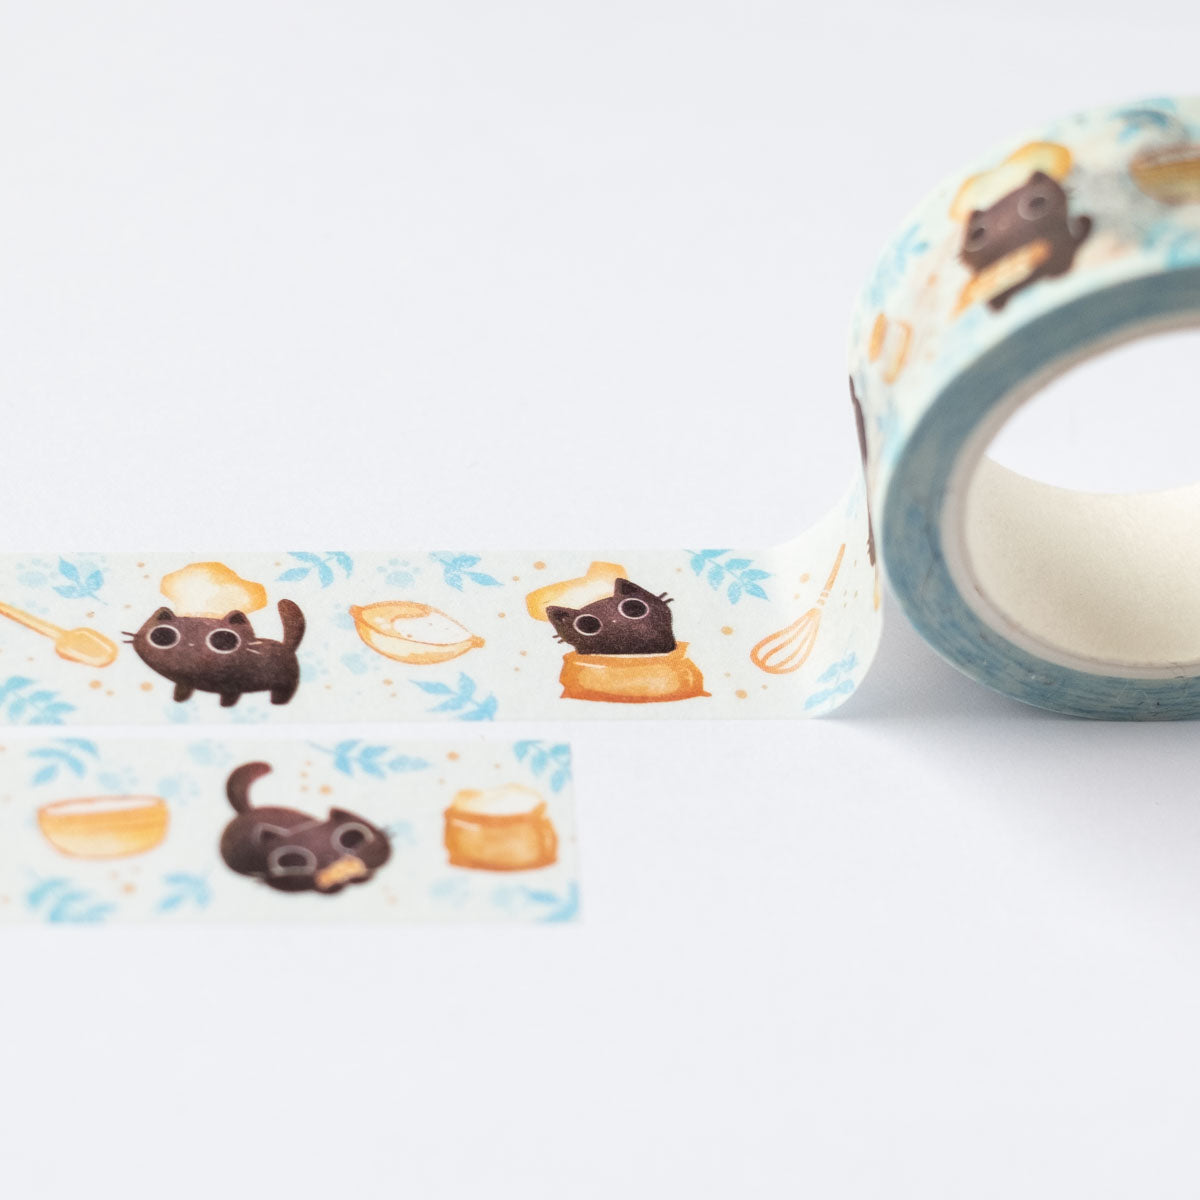 Washi tape - Baking time with cats